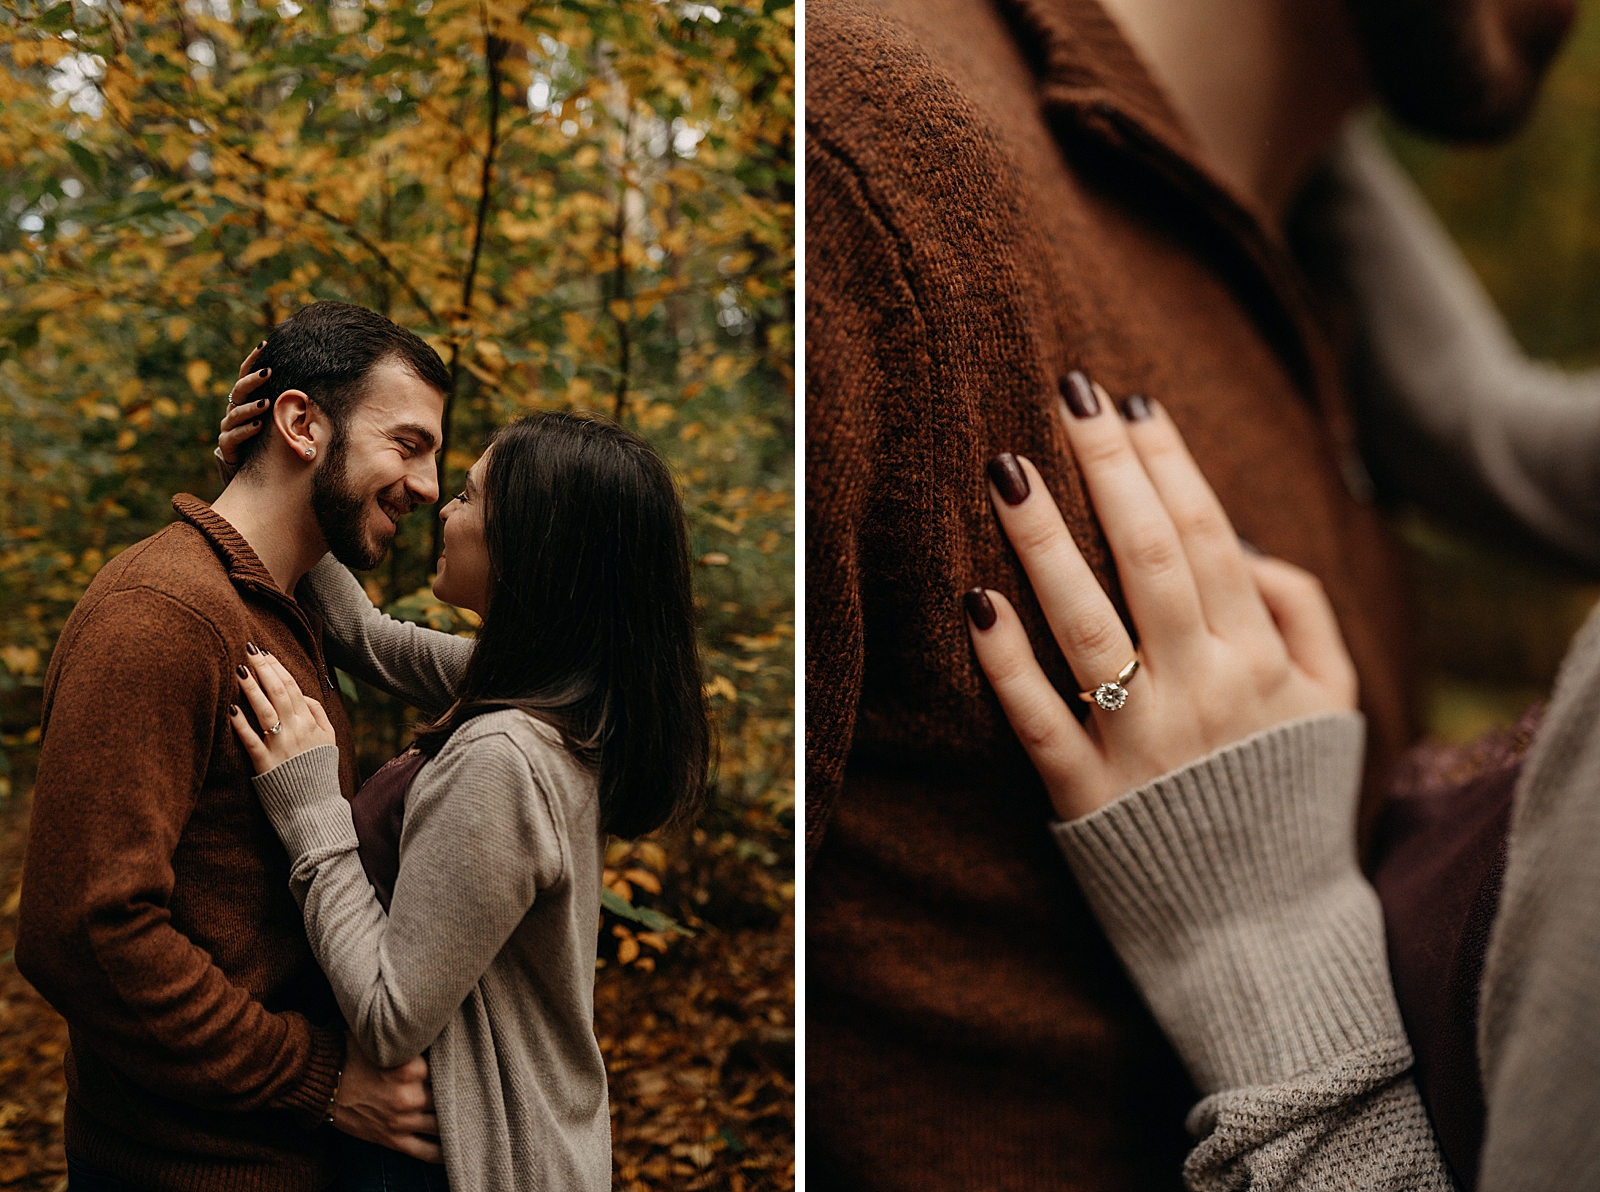 Couple close together and holding each other with engagement ring